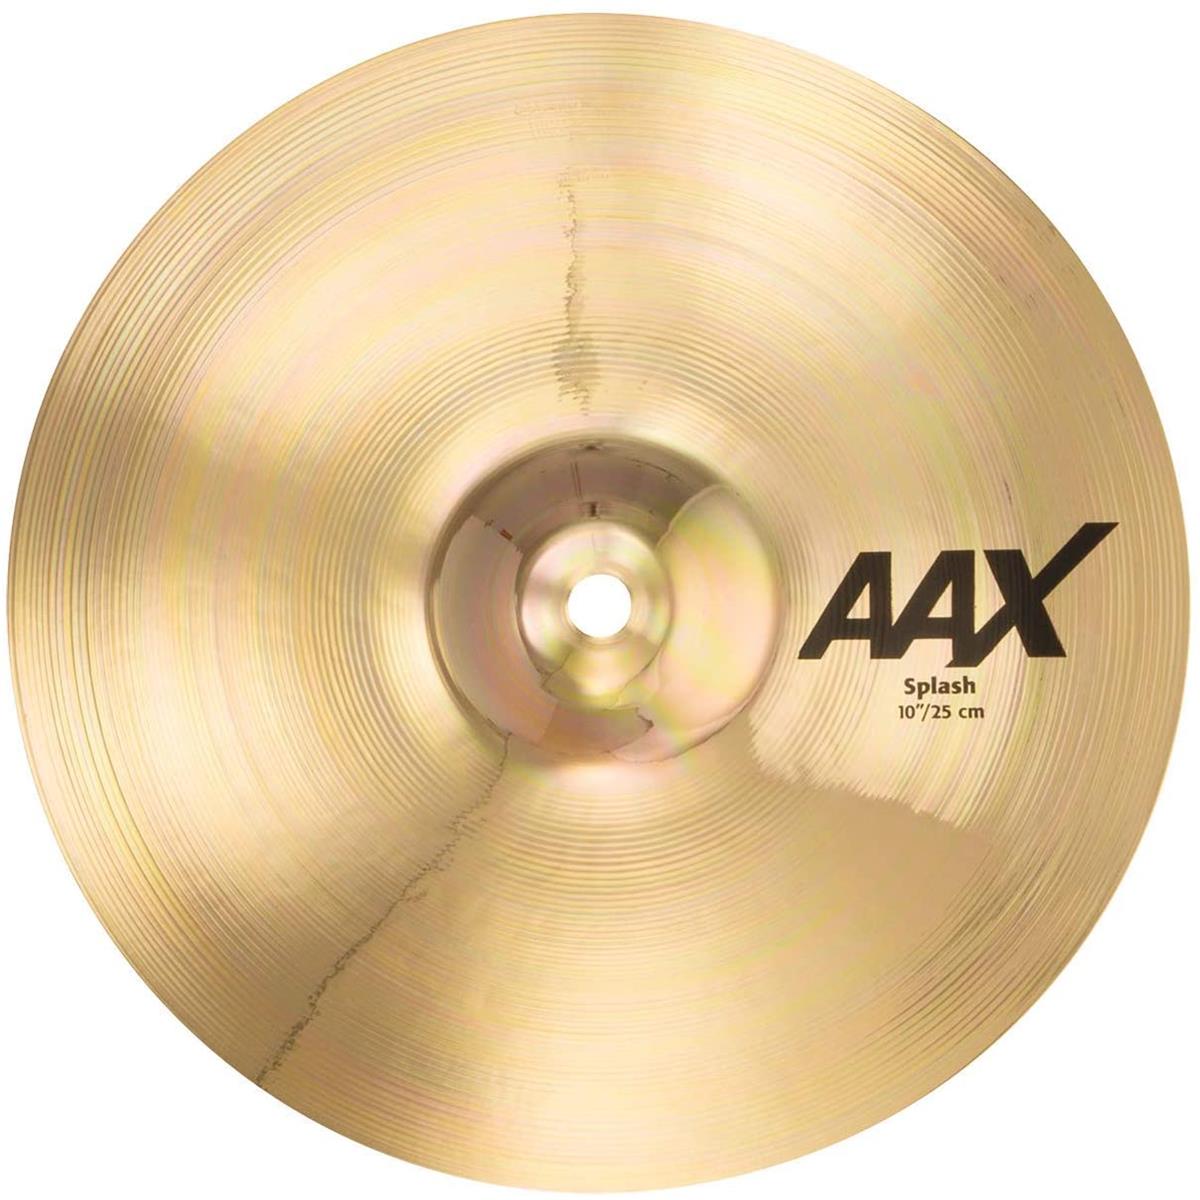 Sabian 10" AAX Splash Cymbal, Extra-Thin, Brilliant Finish Extremely fast and very bright, the SABIAN 10" AAX Splash provides plenty of penetrating cut. The SABIAN AAX series delivers consistently bright, crisp, clear and cutting responses - AAX is the ultimate Modern Bright sound!